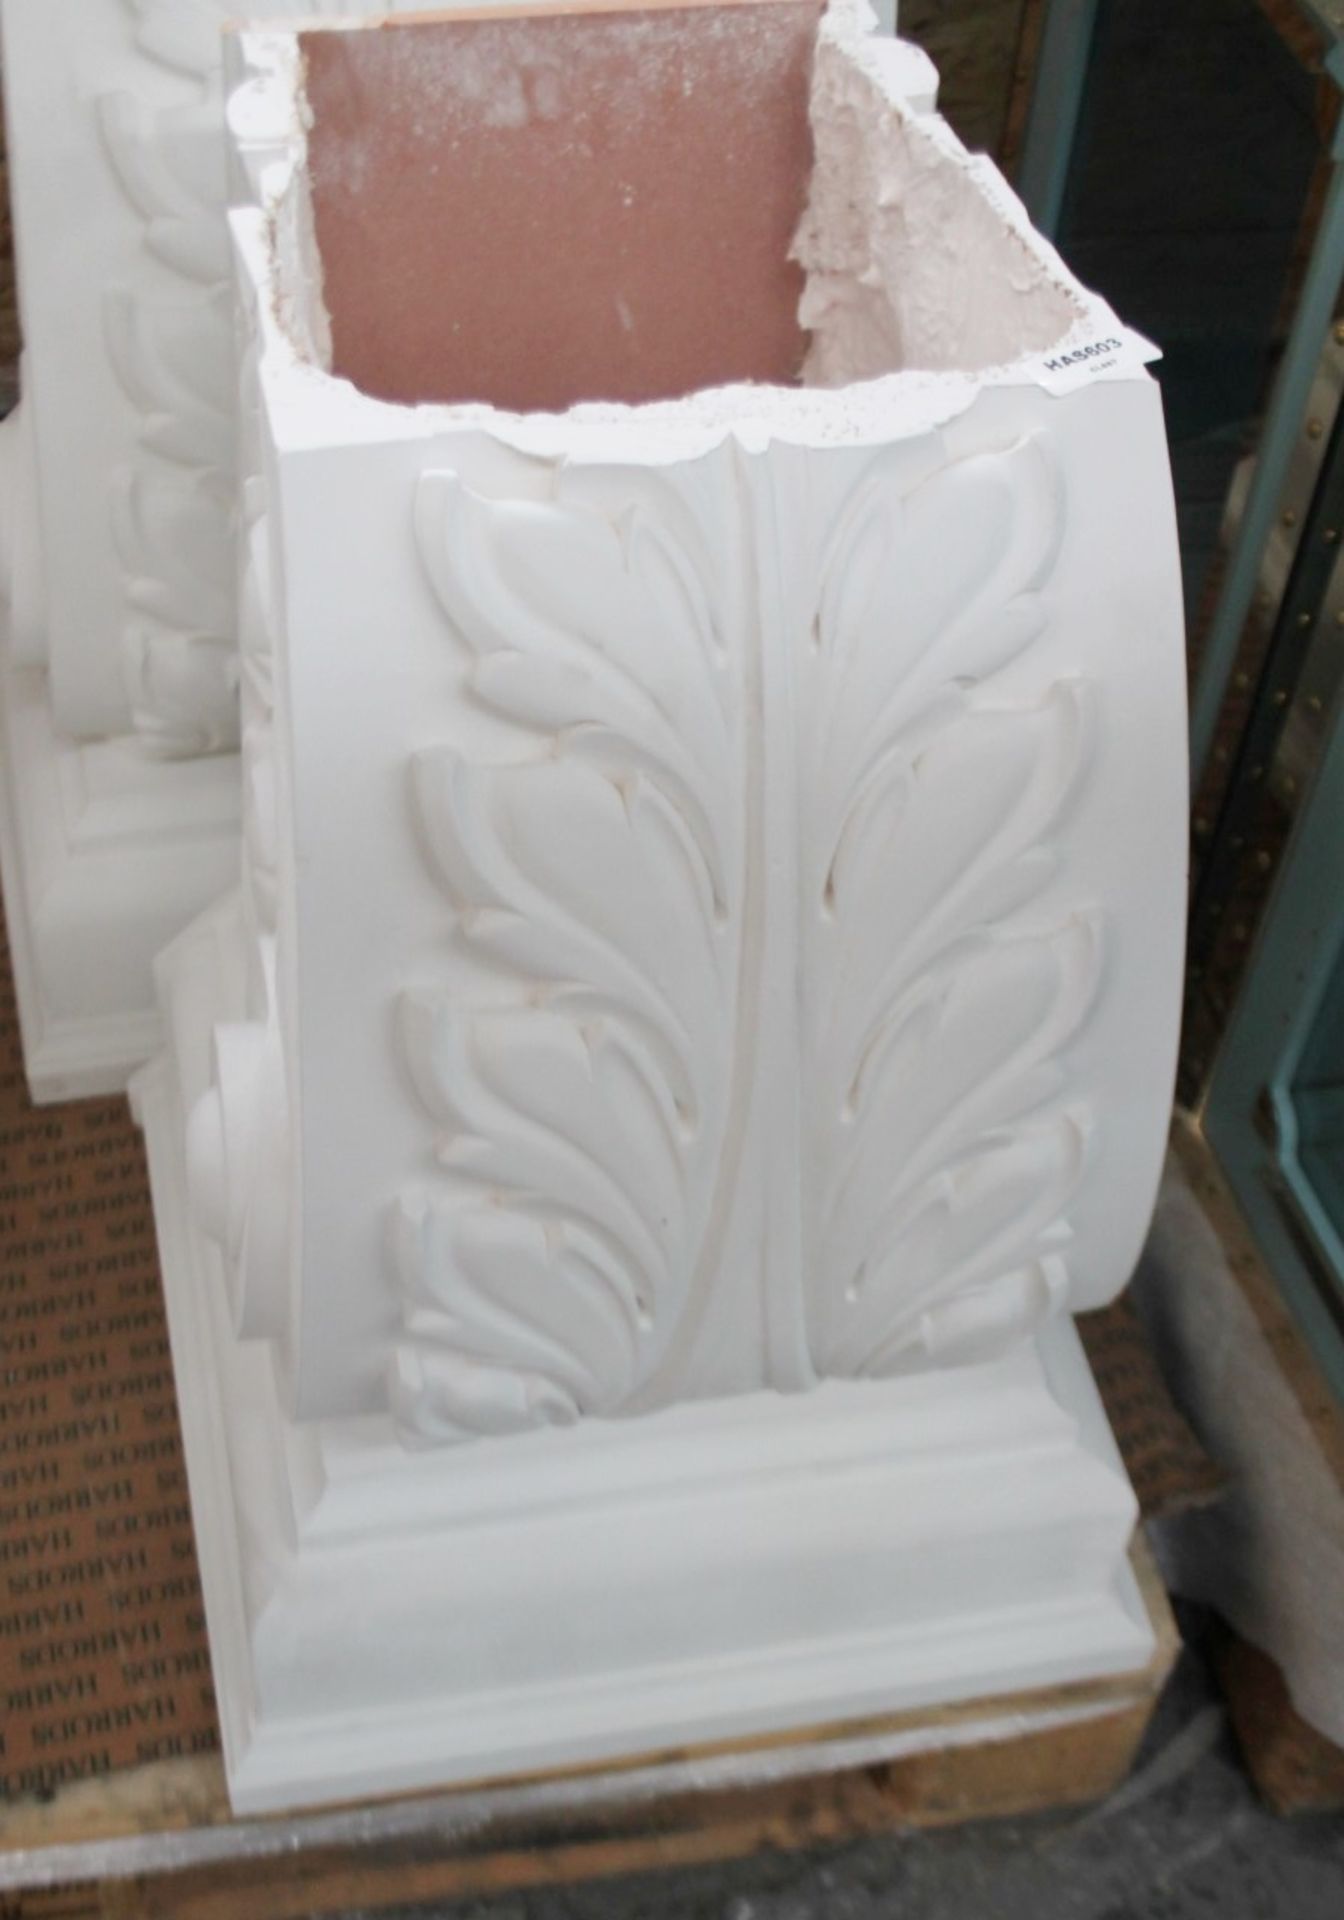 3 x Assorted Sections Of Ornate Display Plinth, Specially Commissioned For A Givenchy Window Display - Image 11 of 11